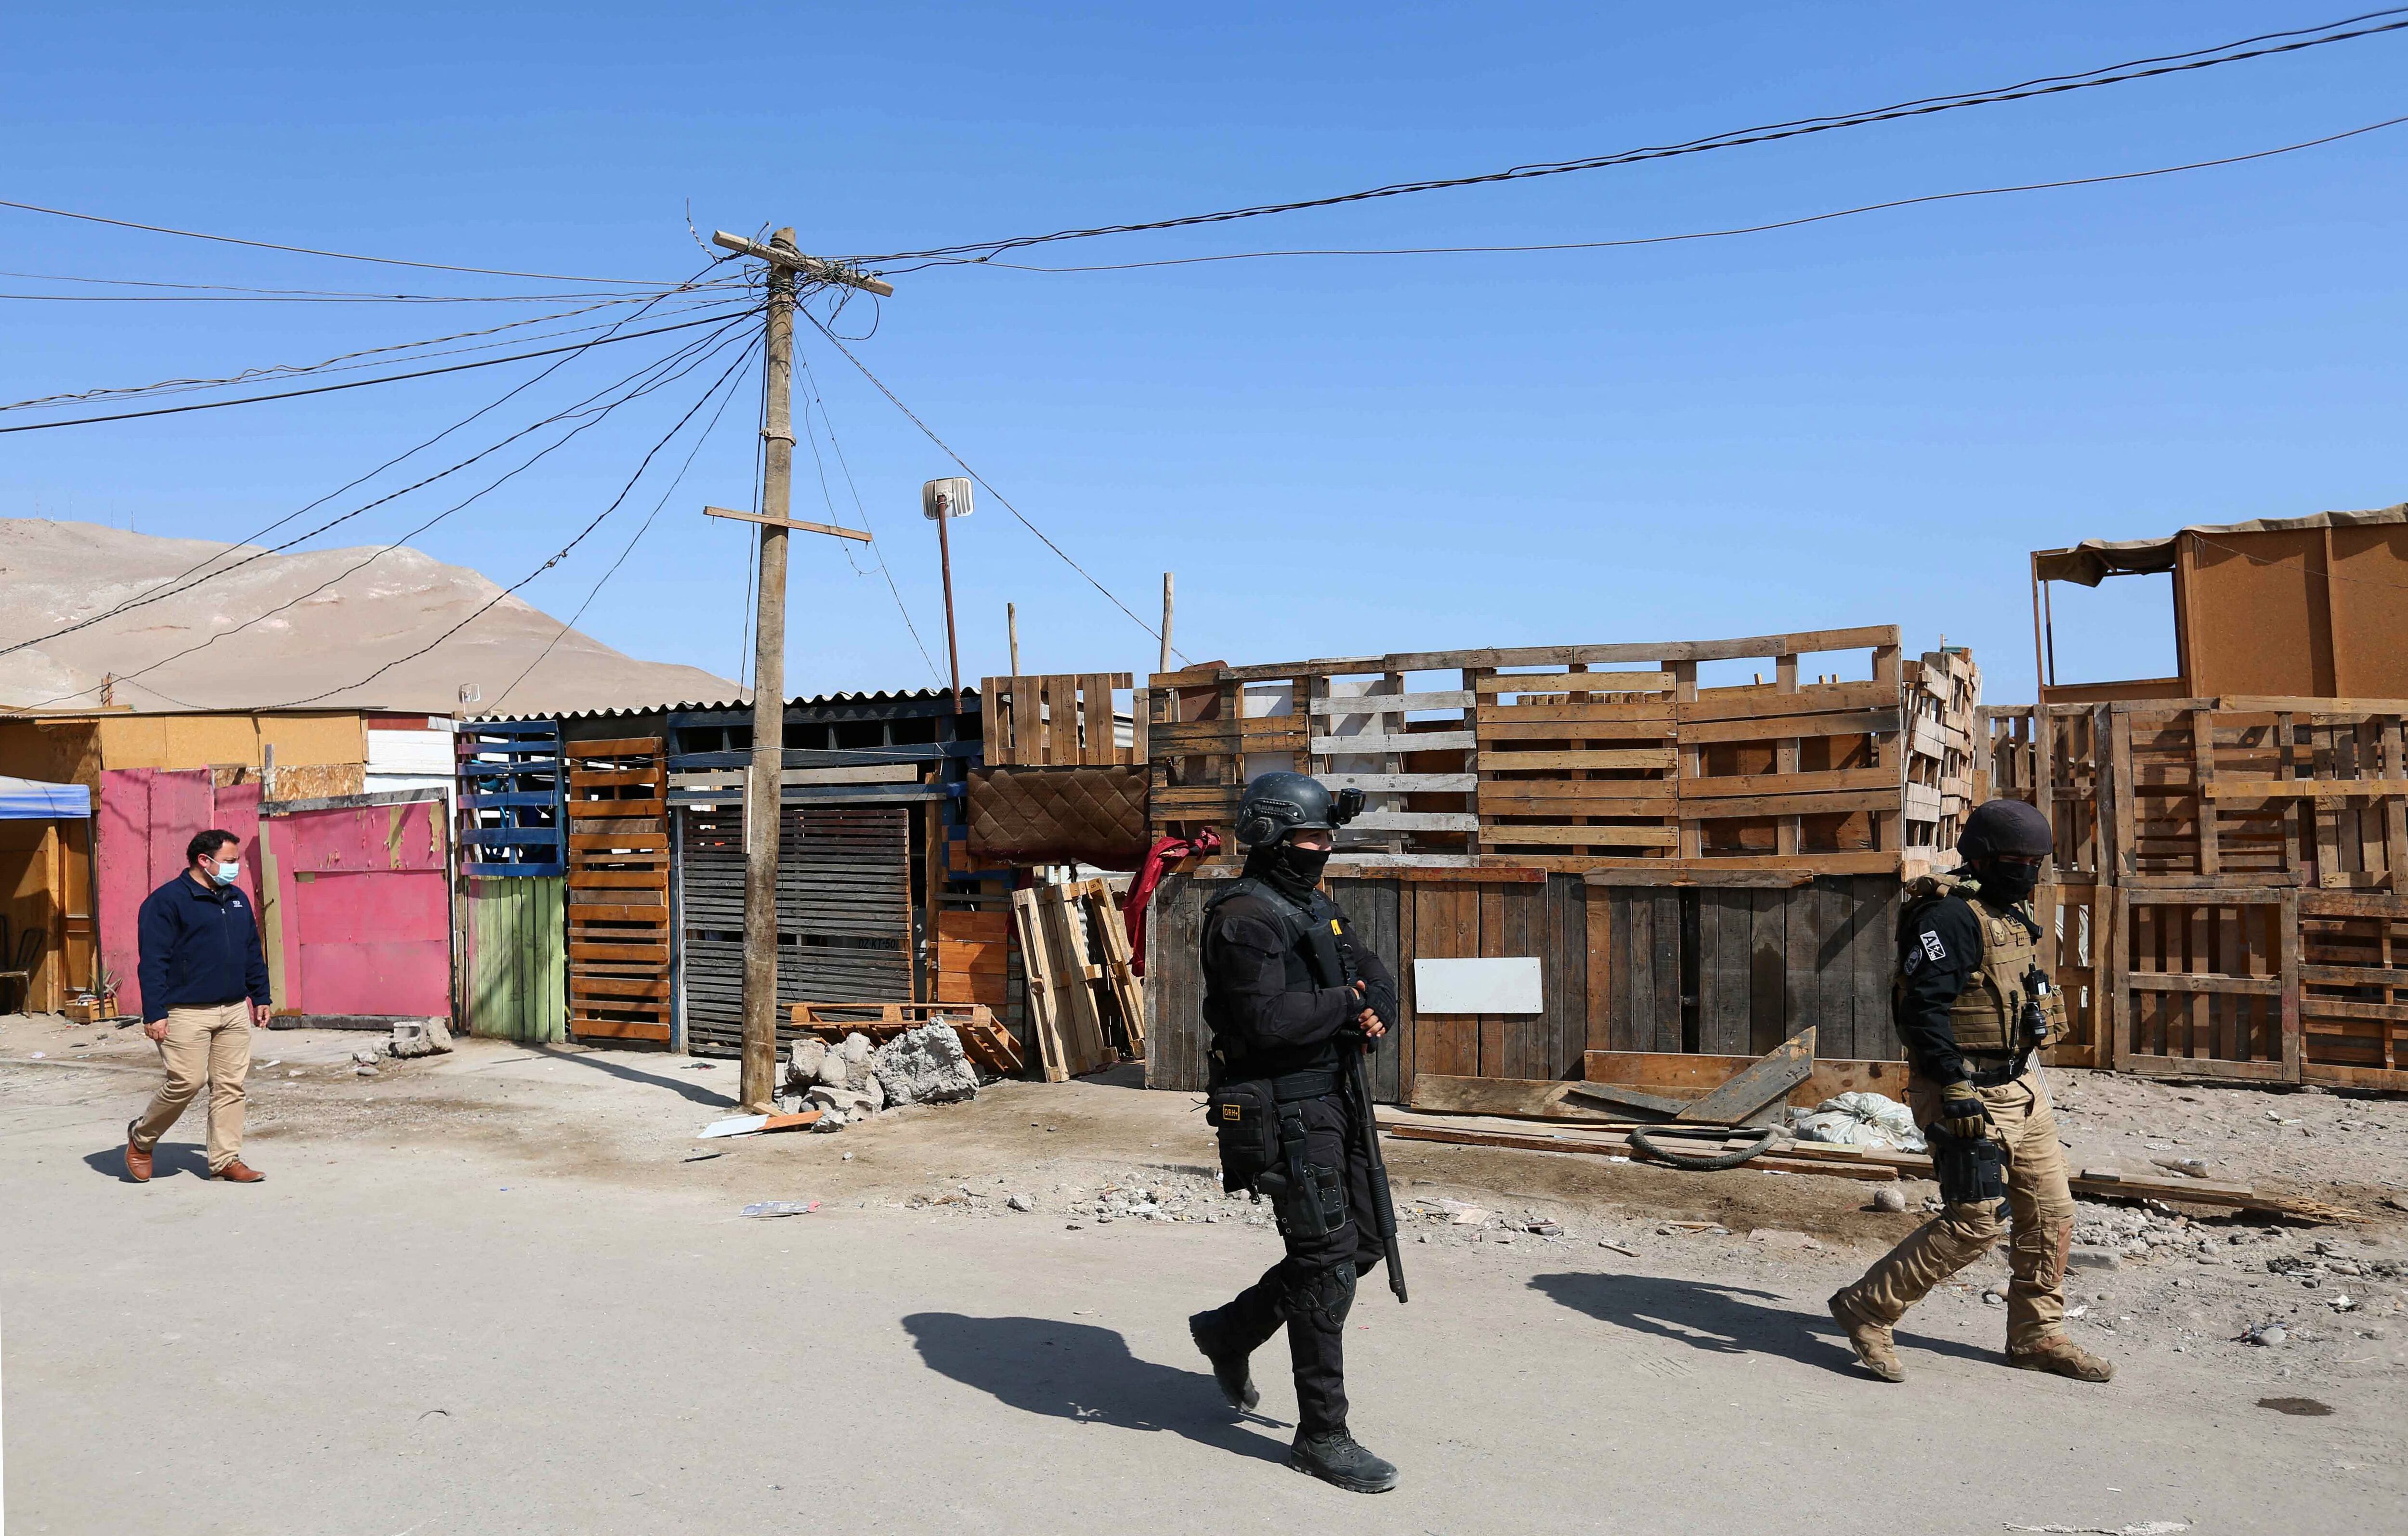 Chile's Investigative Police (PDI) patrols an area around Cerro Chuño, on the outskirts of Arica, on June 16, 2022, where the Los Gallegos criminal group is located.  (AFP).